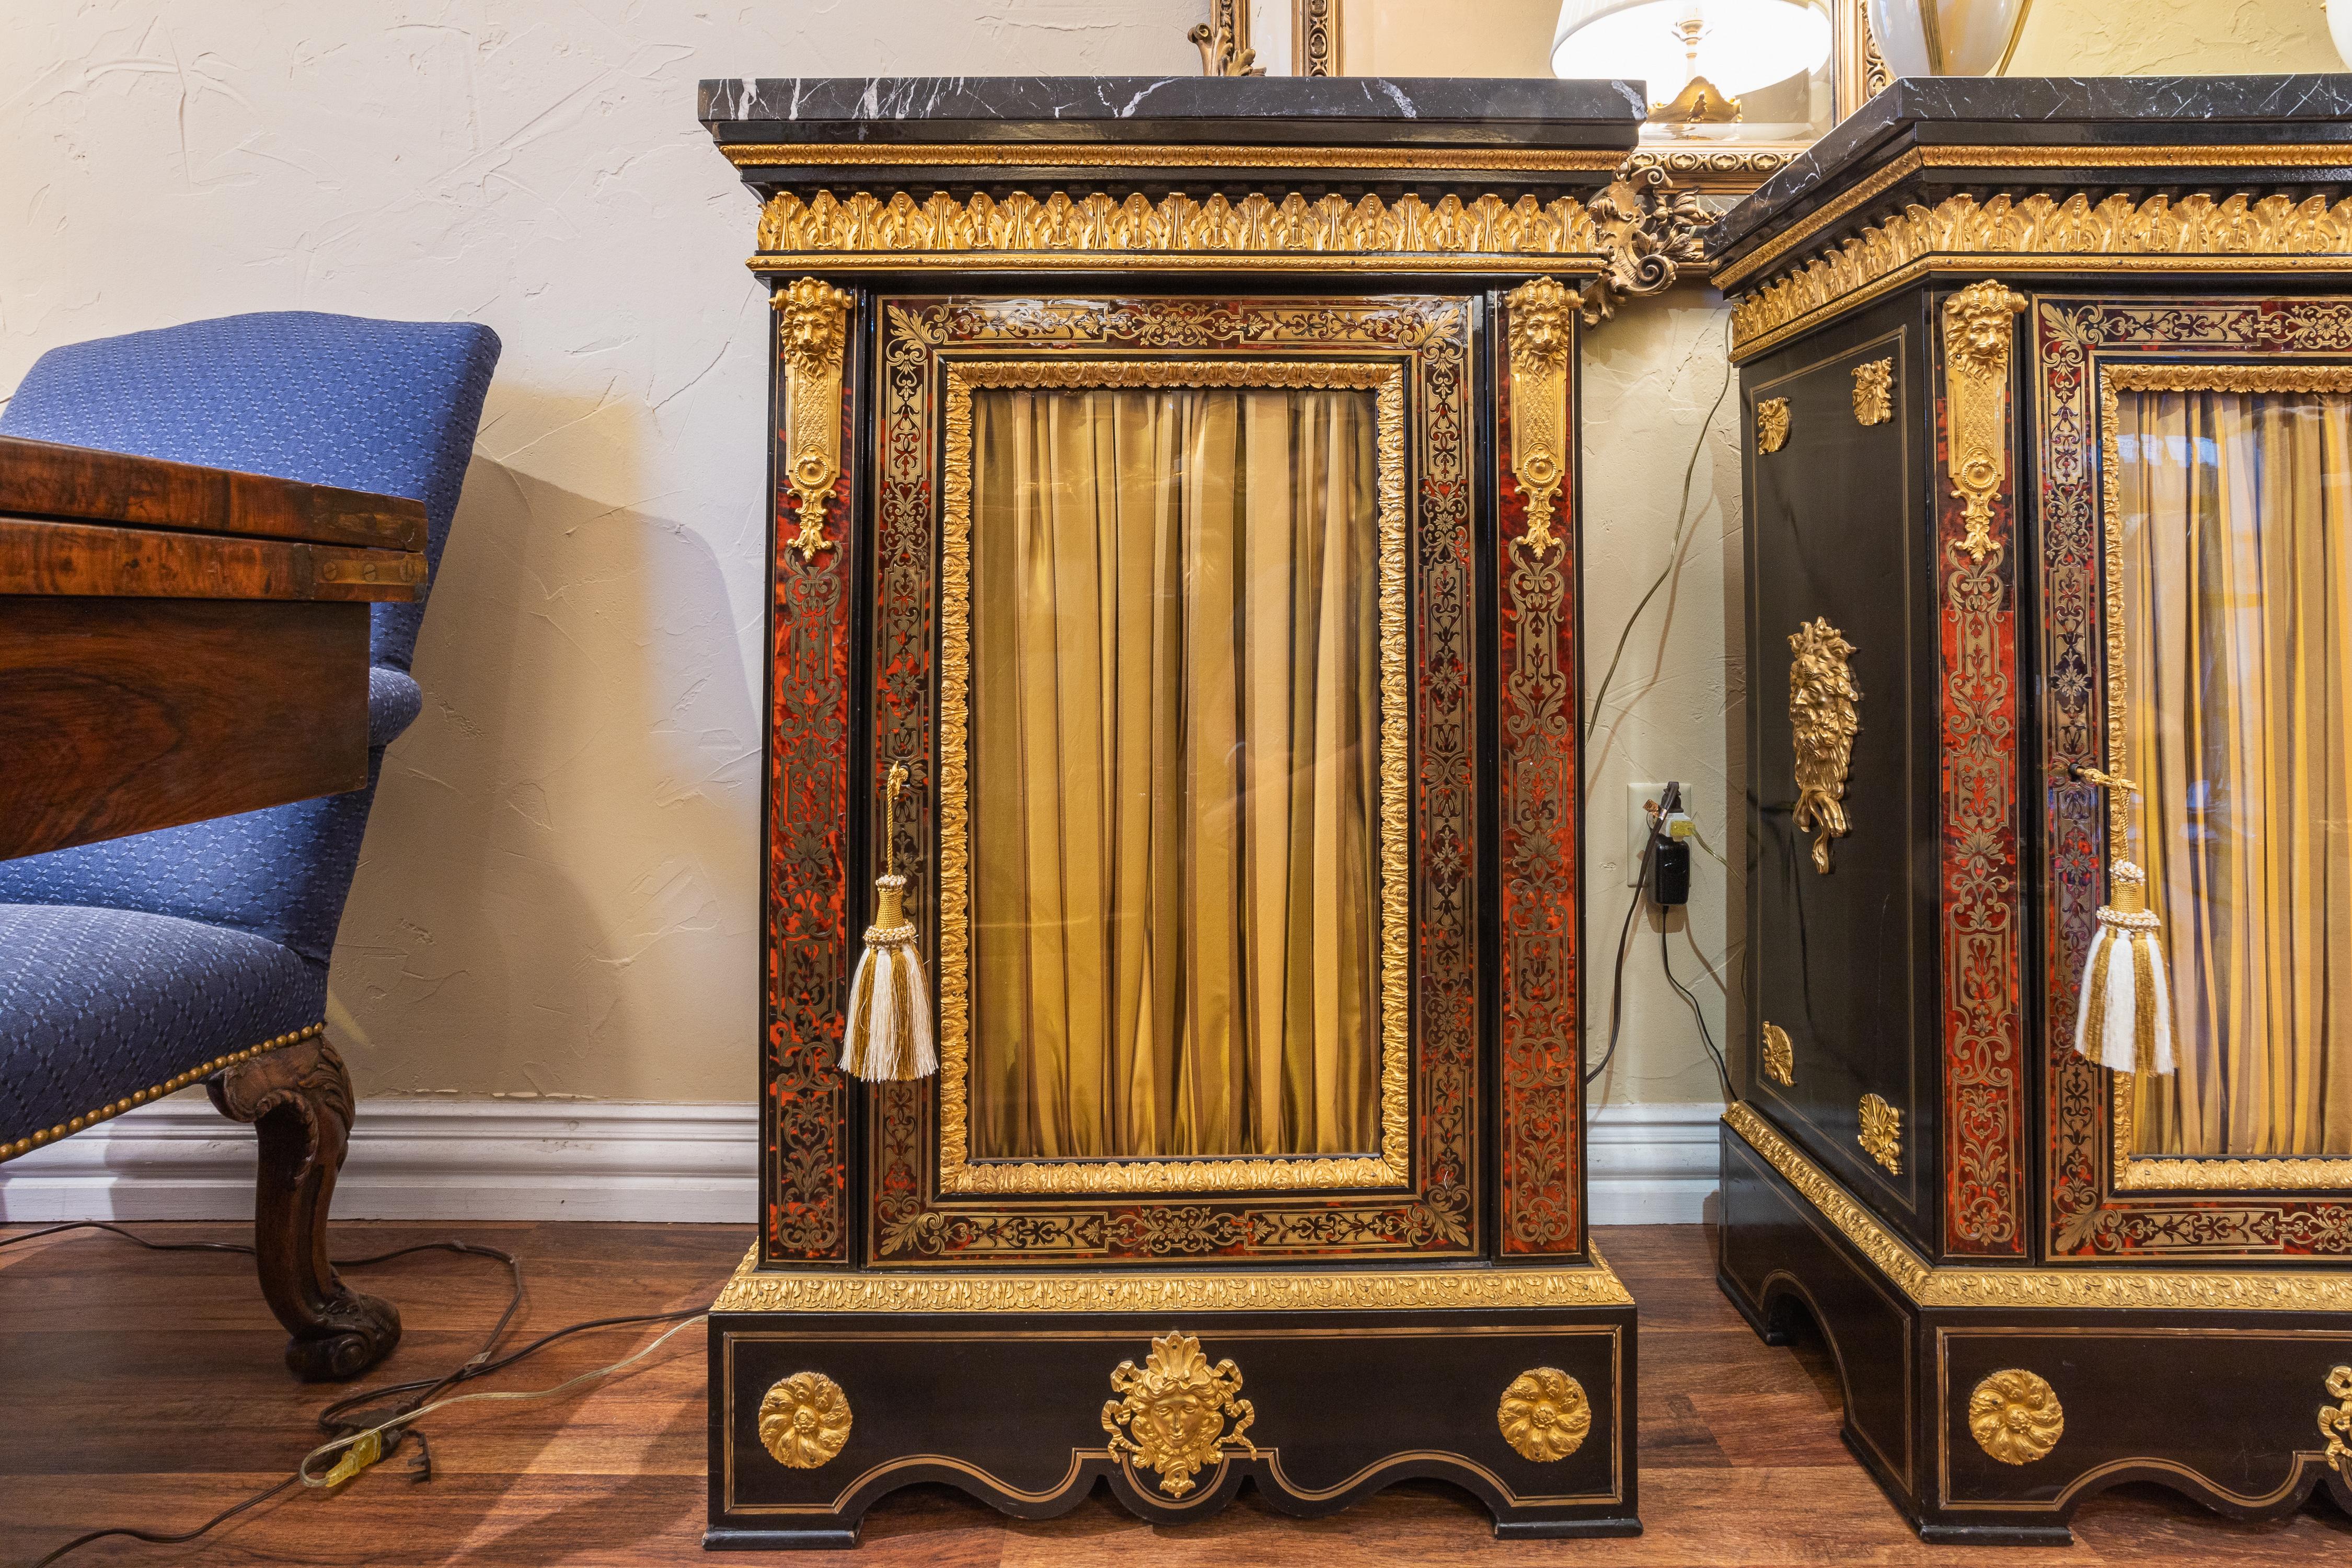 A very fine pair of 19th century French Boulle and gilt bronze mounted cabinets. Finest quality mercury gilt bronze mounts. Belgium black marble .